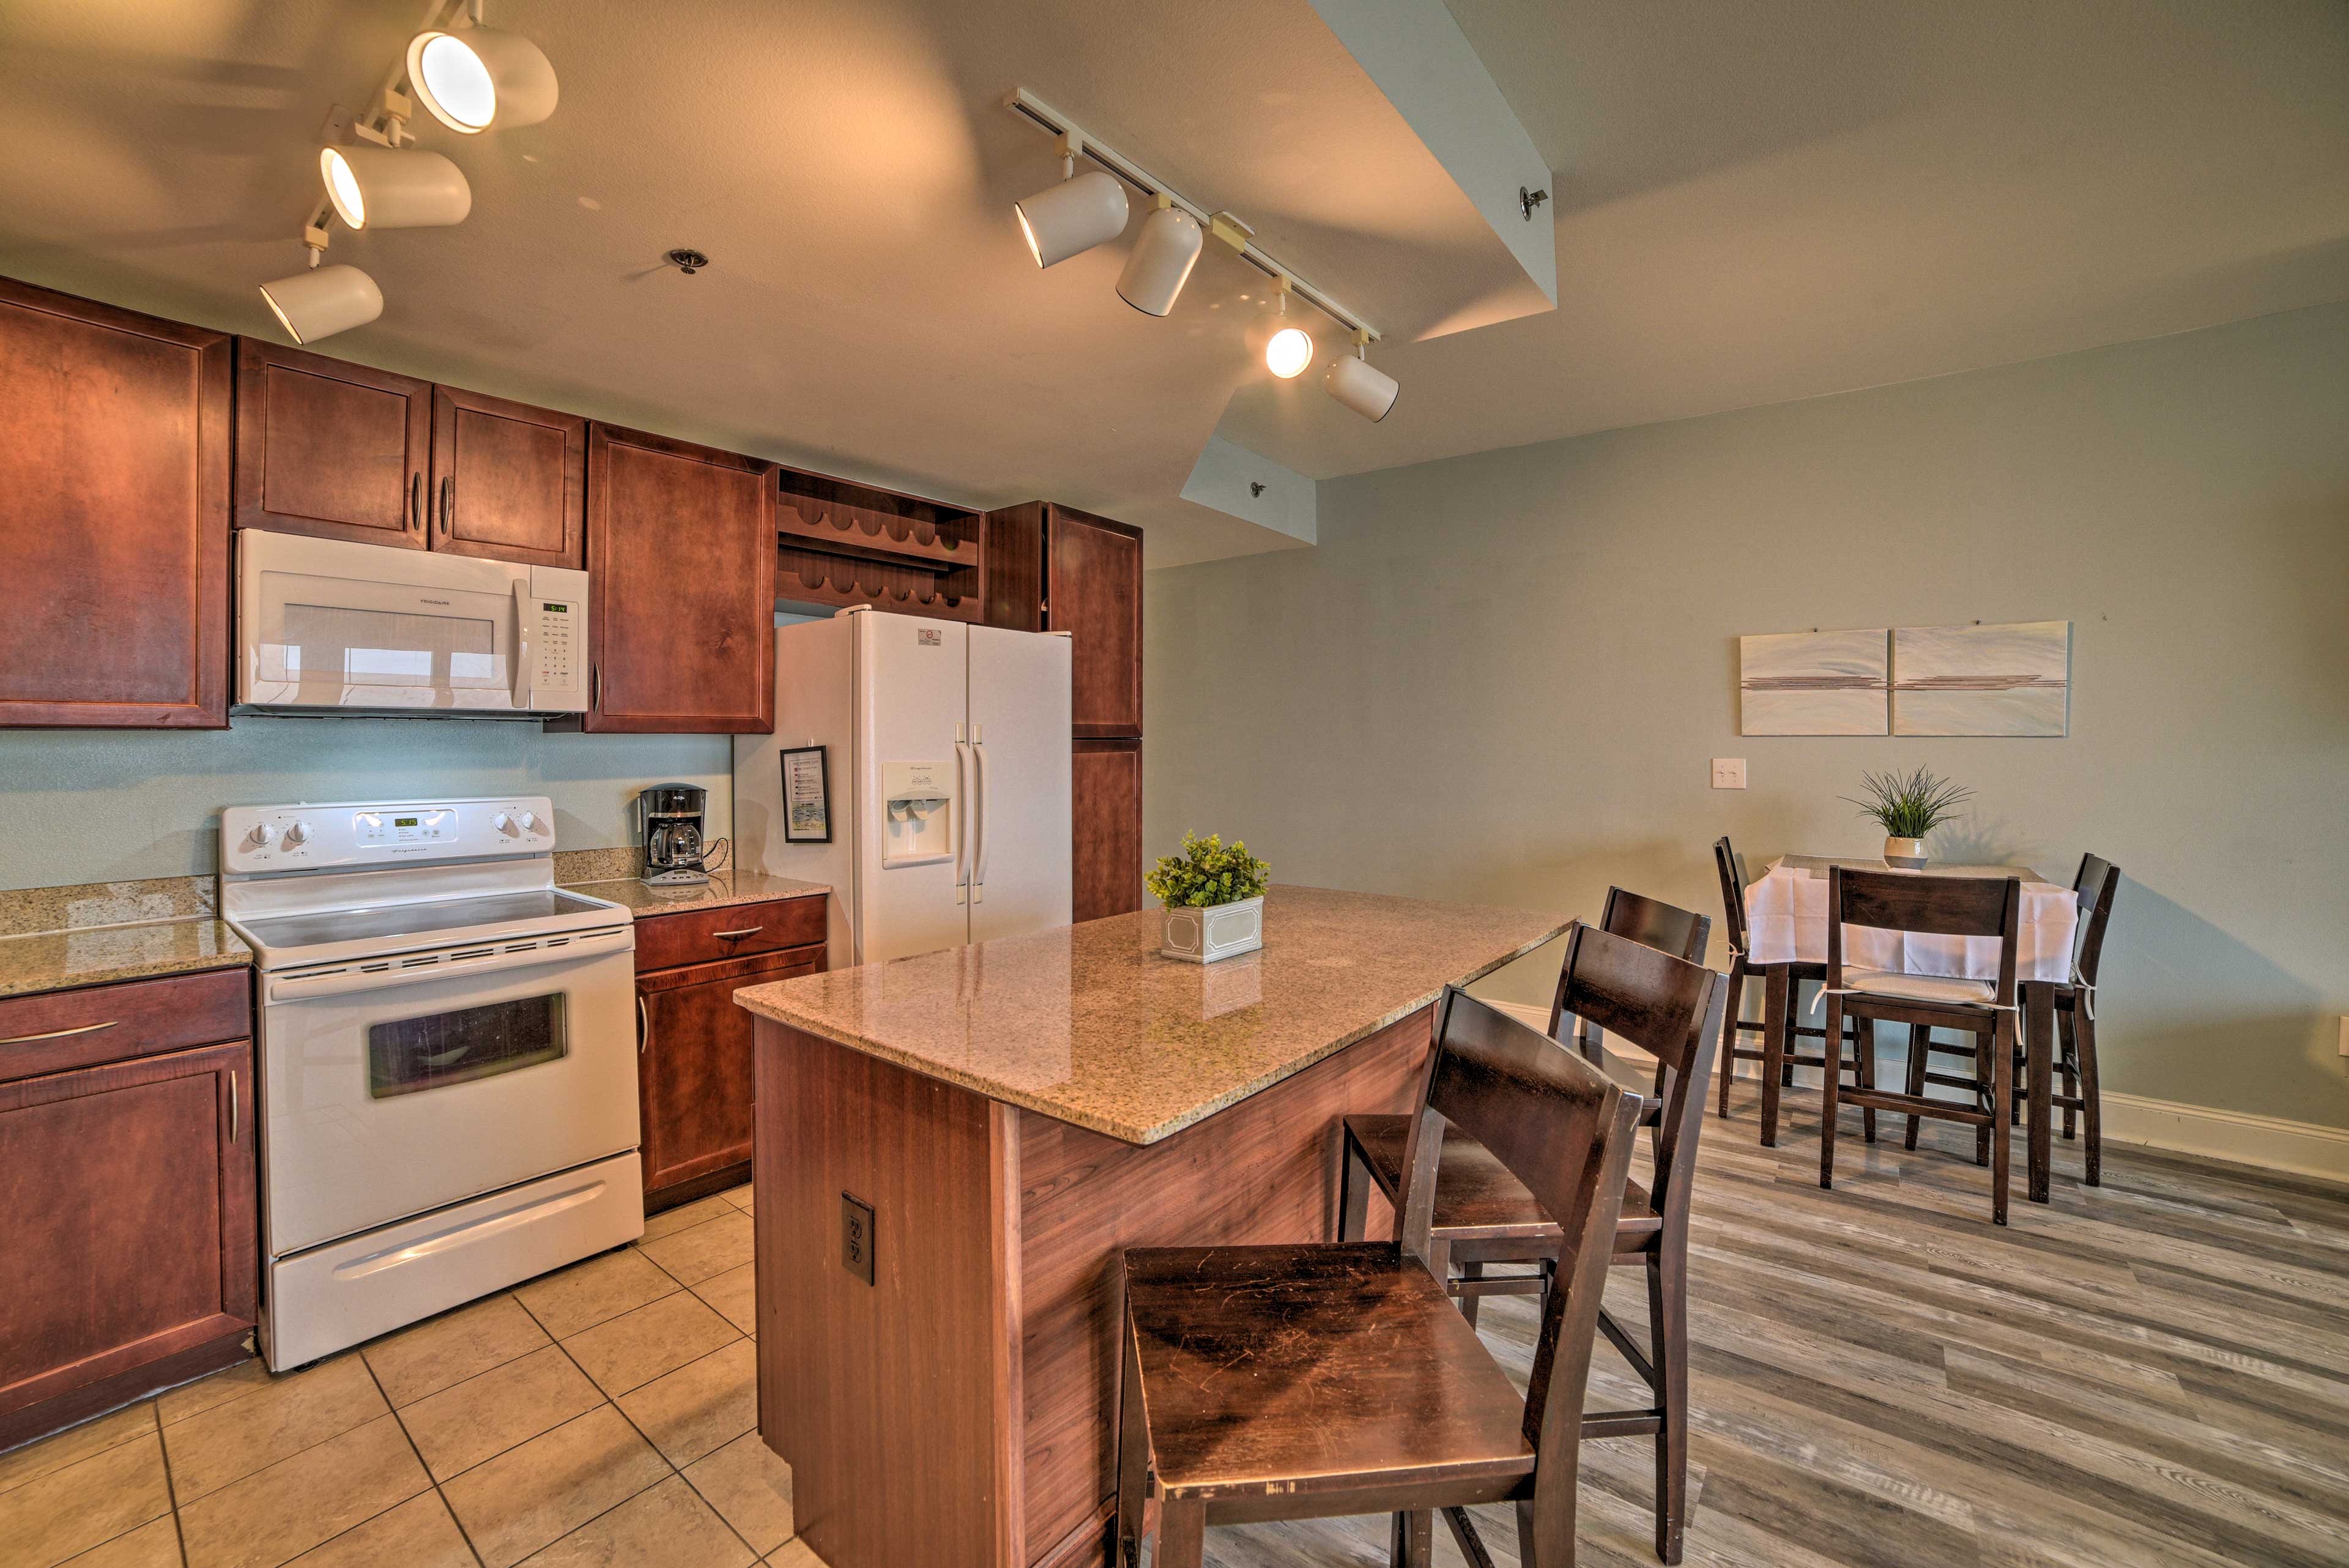 Kitchen | Fully Equipped